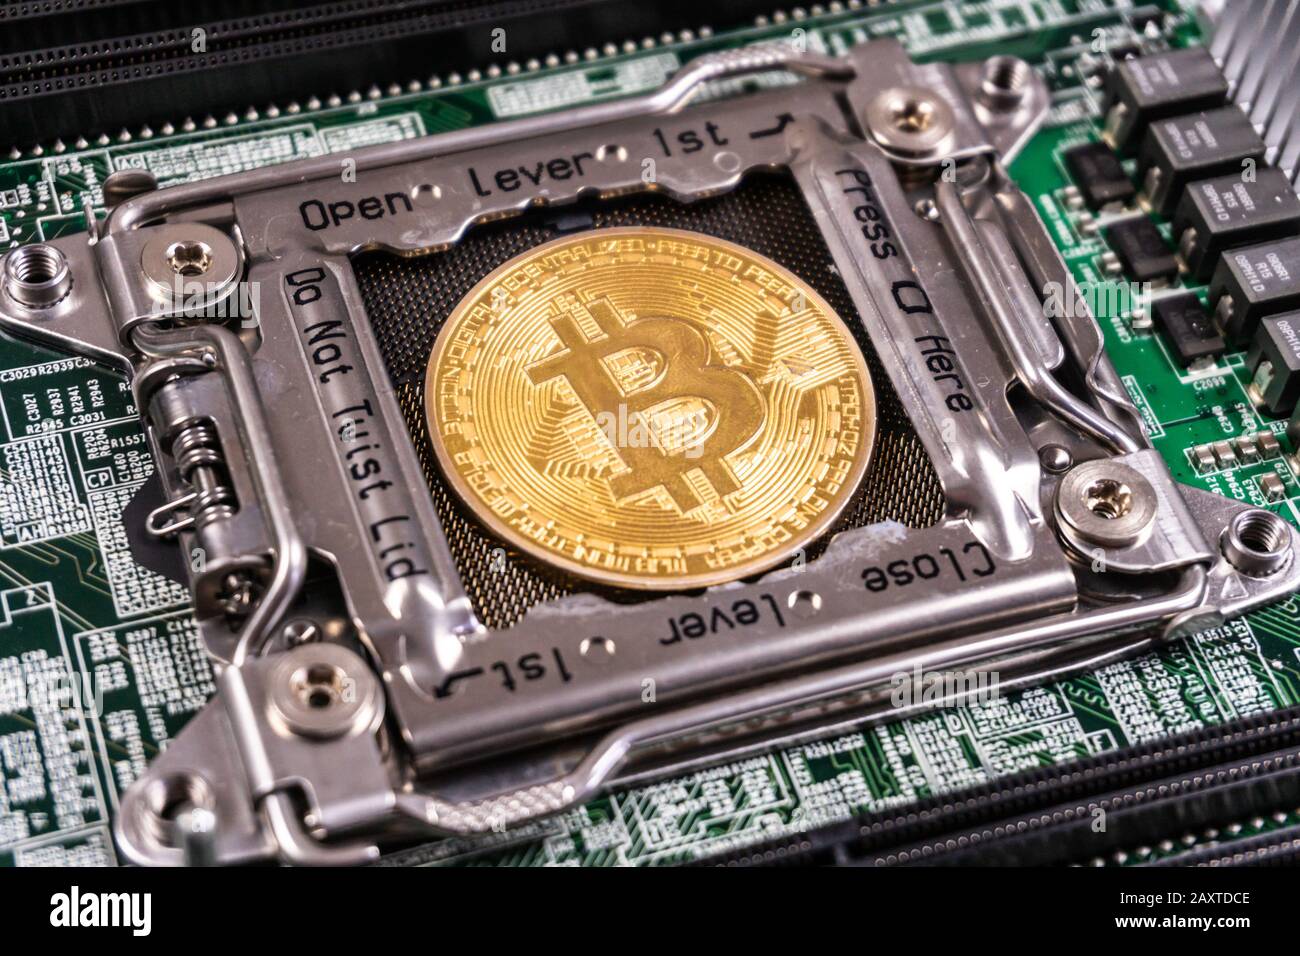 cpu bound cryptocurrency